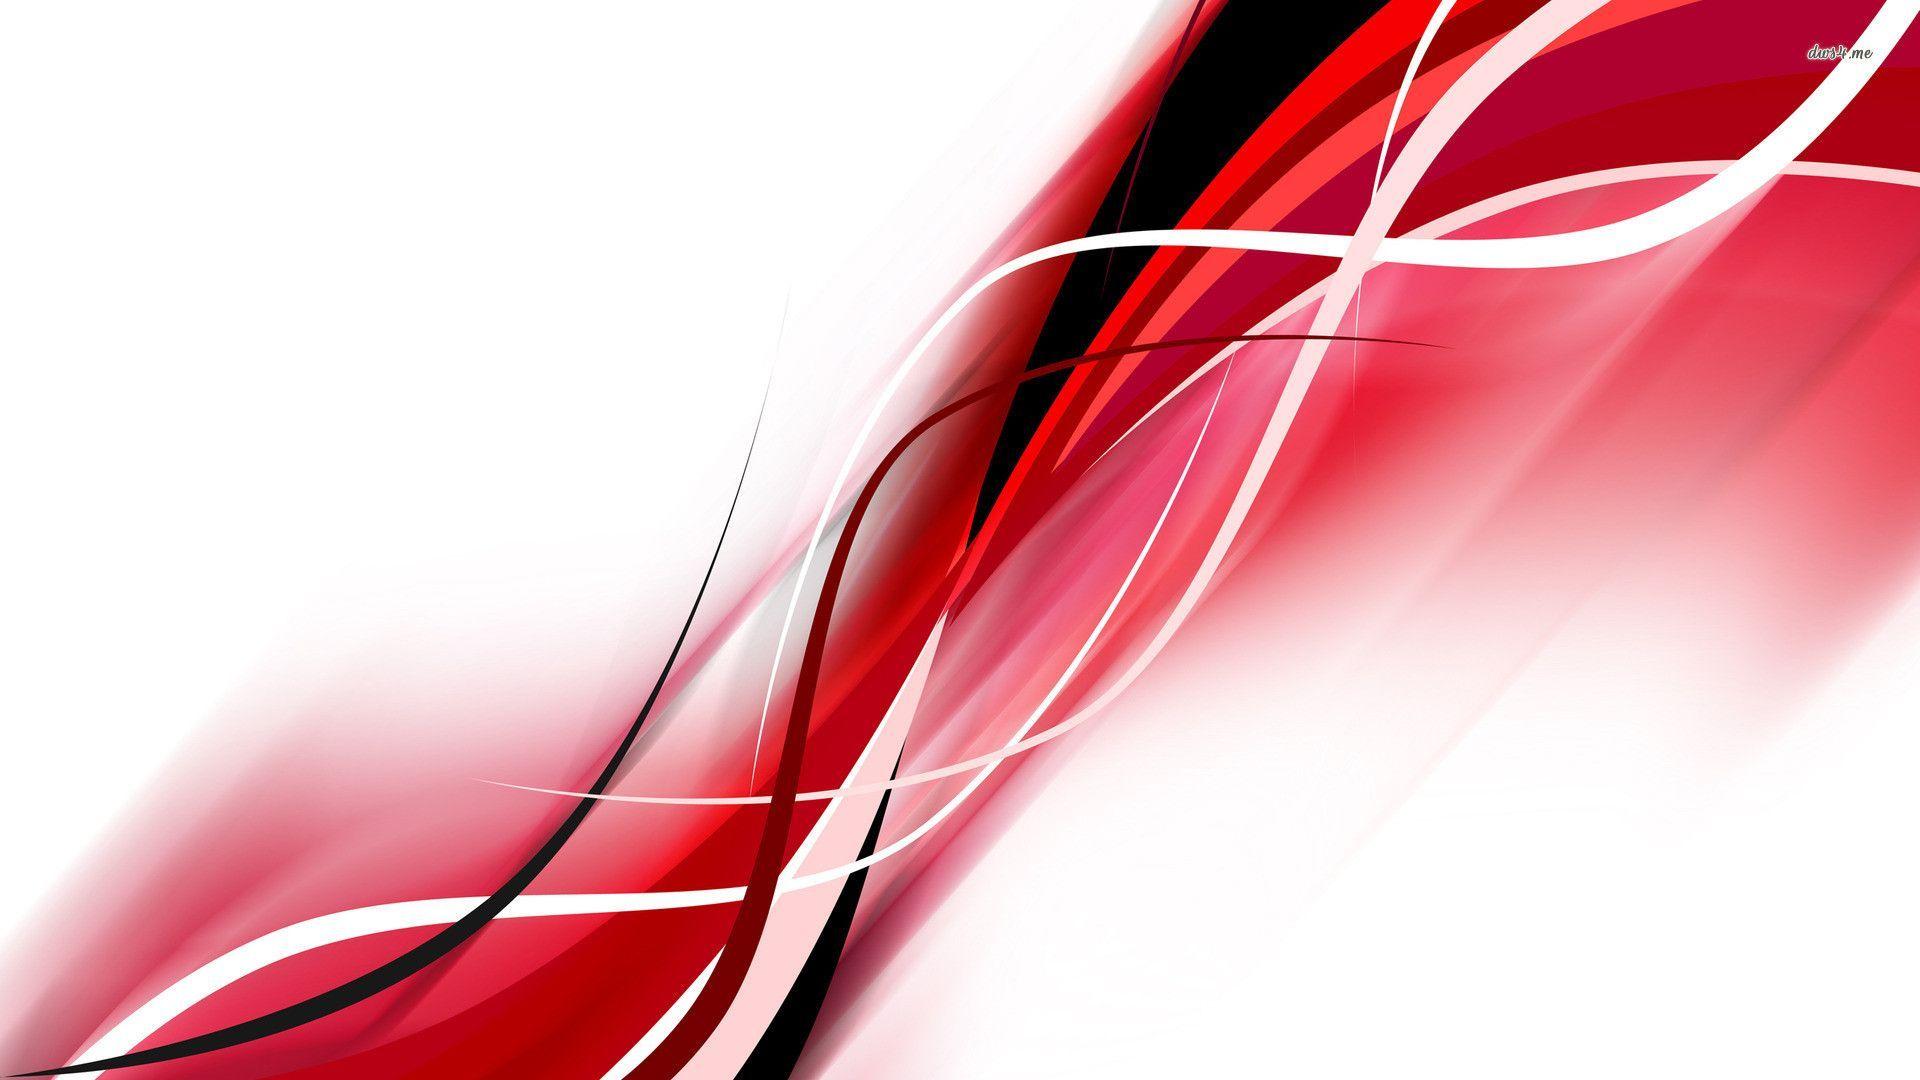 Black And White And Red Abstract Wallpaper HD 1080P 11 HD